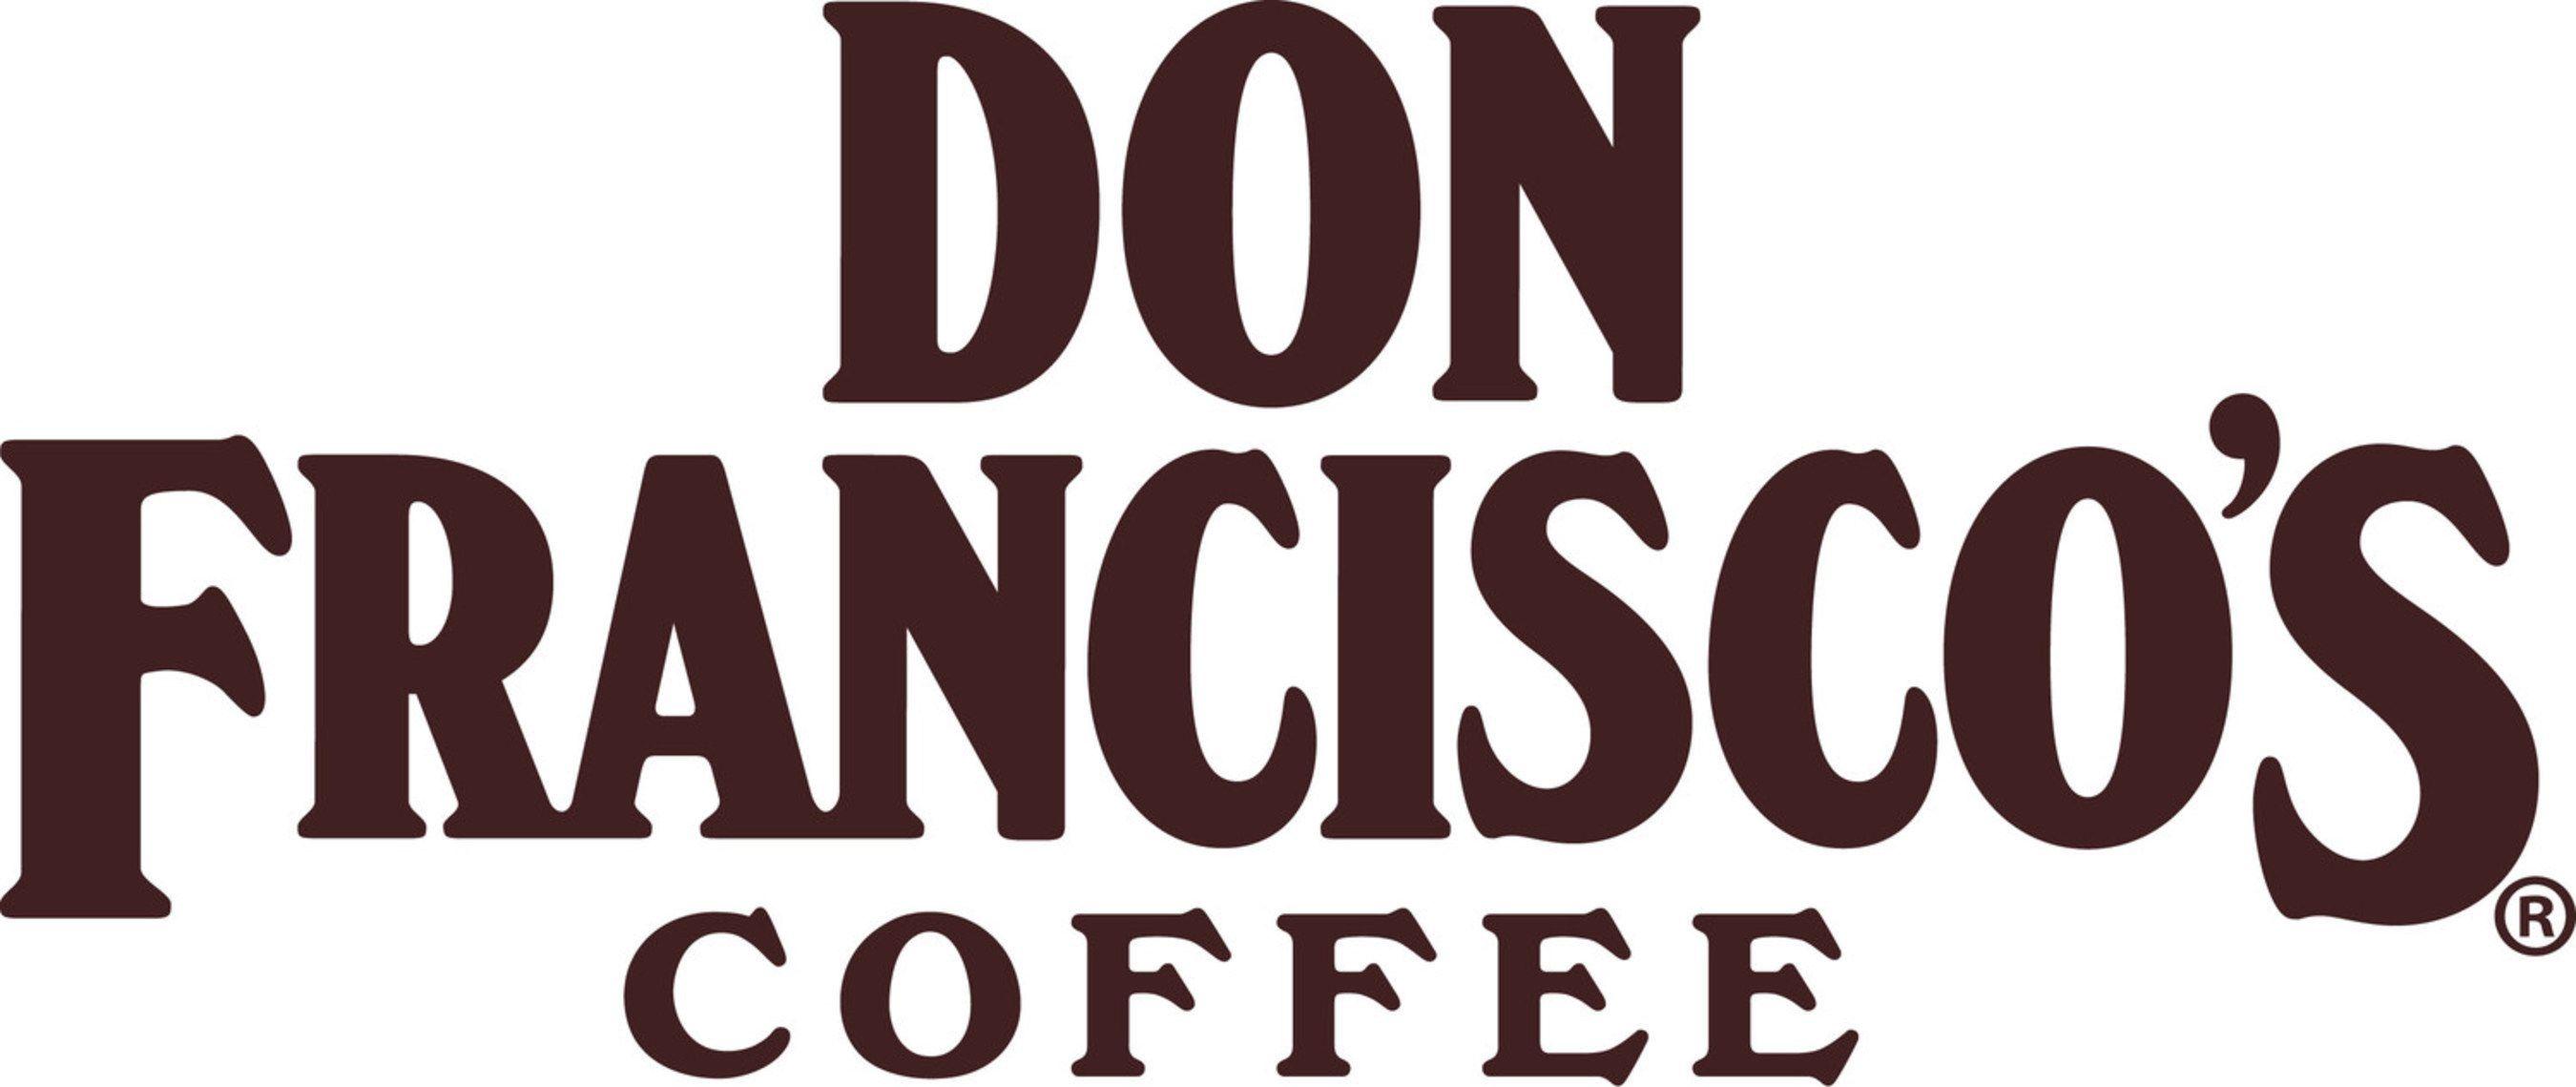 Leading Coffee Brand in USA Logo - Don Francisco's invites coffee lovers to chill out with cold brew ...